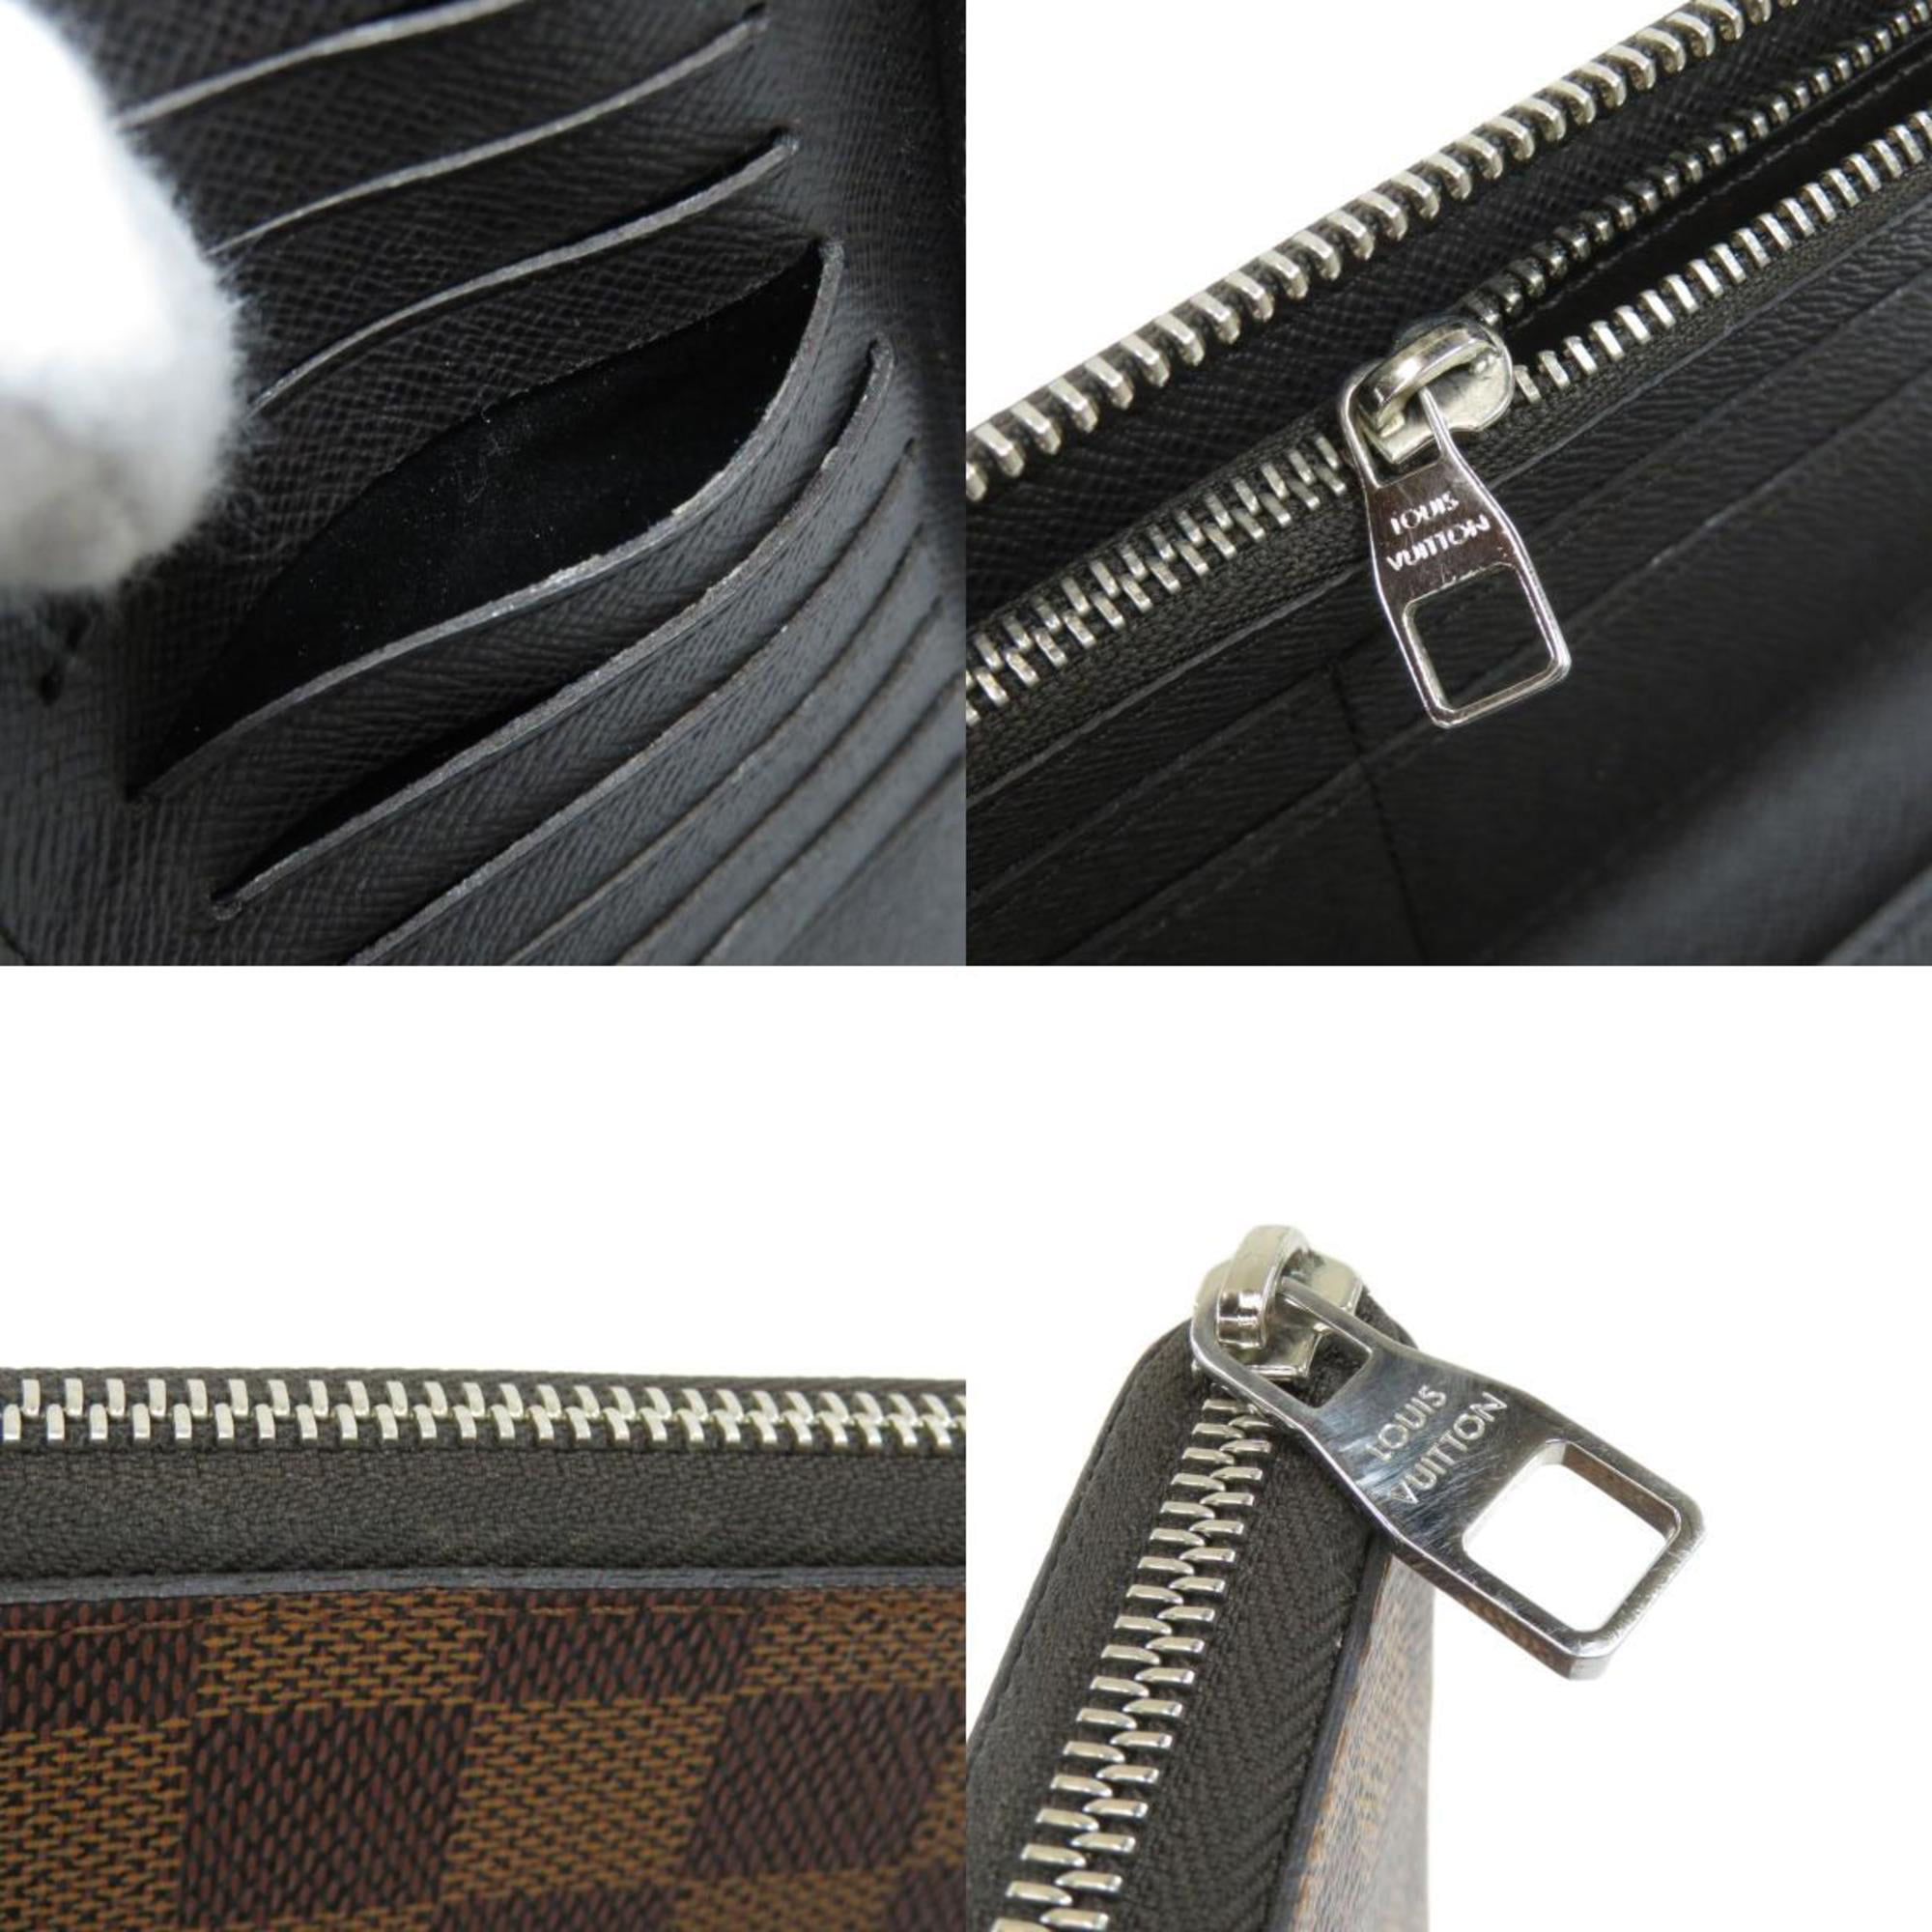 Buy [Used] LOUIS VUITTON Zippy Wallet Vertical Round Zipper Long Wallet  Damier Ebene N61207 from Japan - Buy authentic Plus exclusive items from  Japan